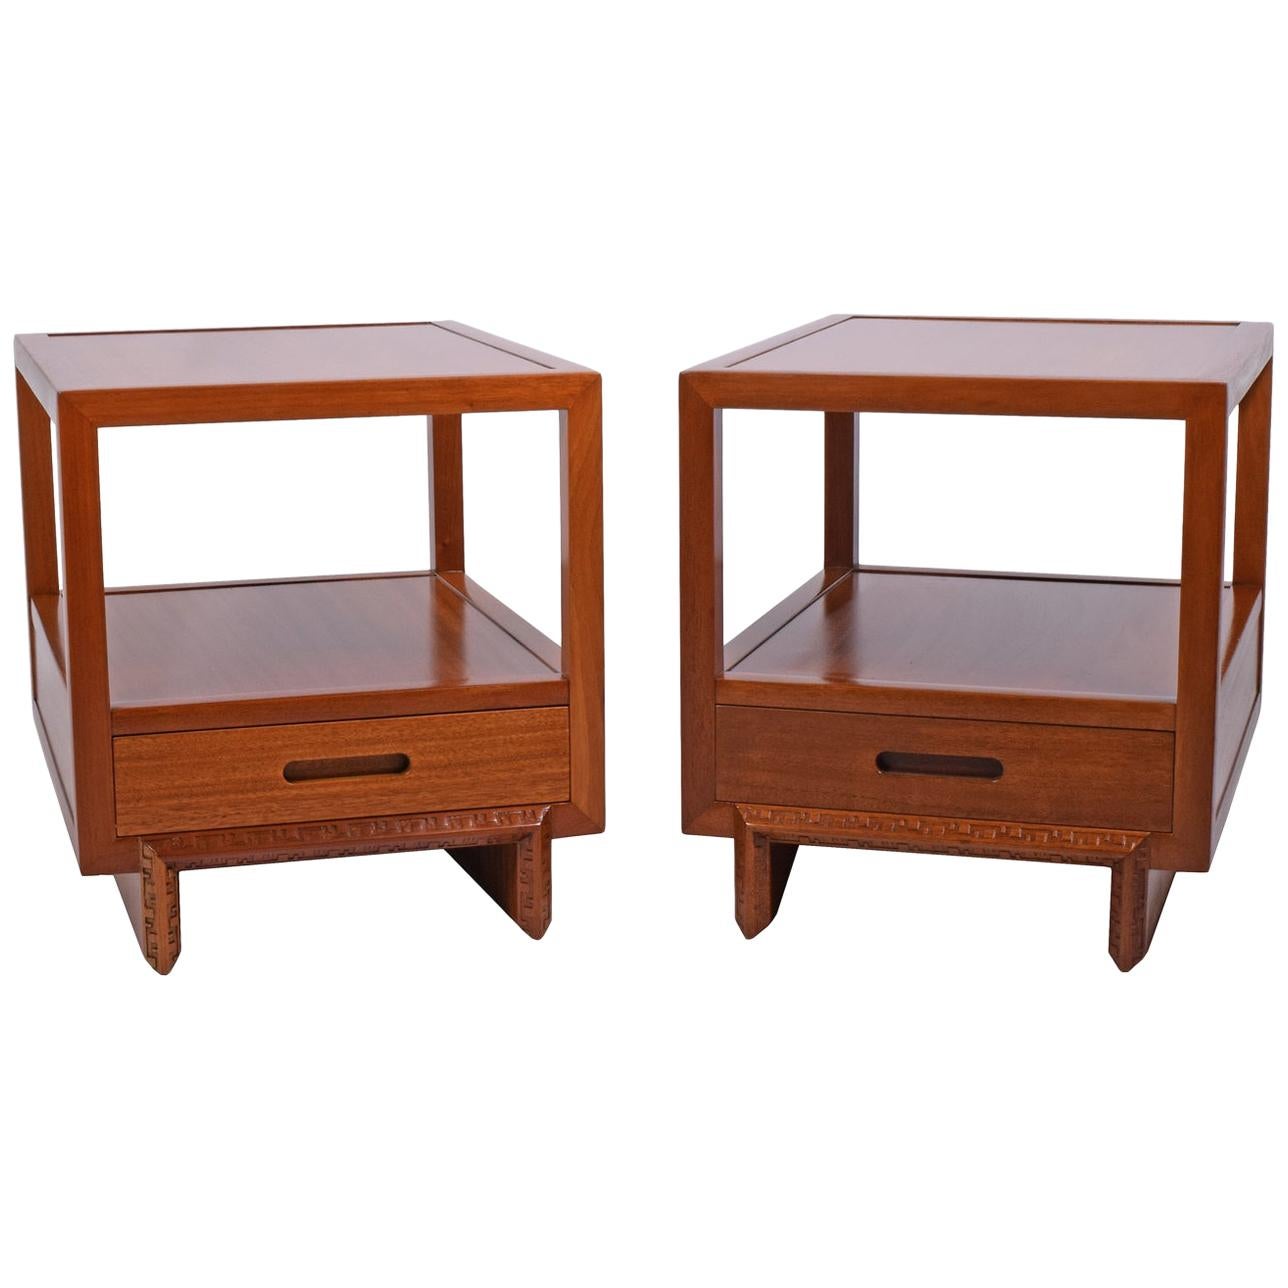 Pair of Nightstands/Side Tables by Frank Lloyd Wright for Heritage Henredon